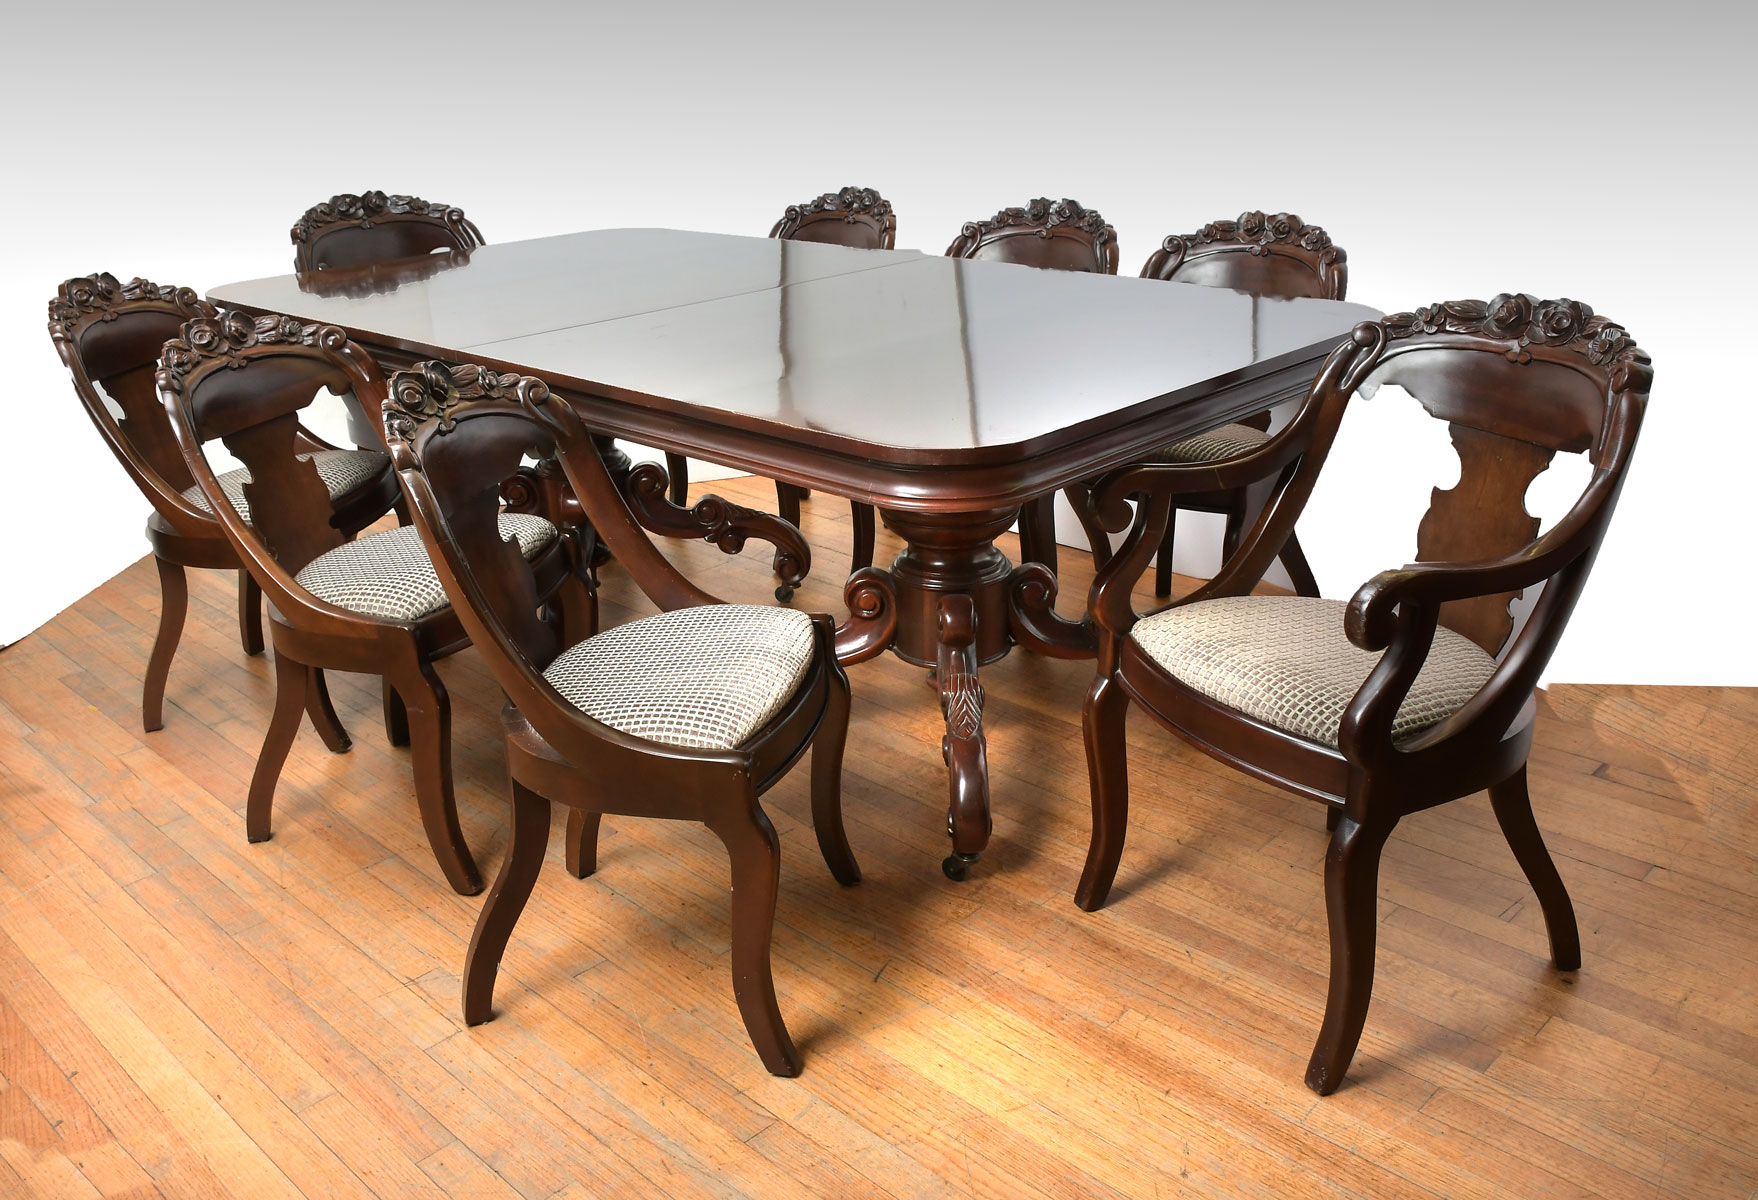 DINING TABLE WITH 6 CHAIRS & 2